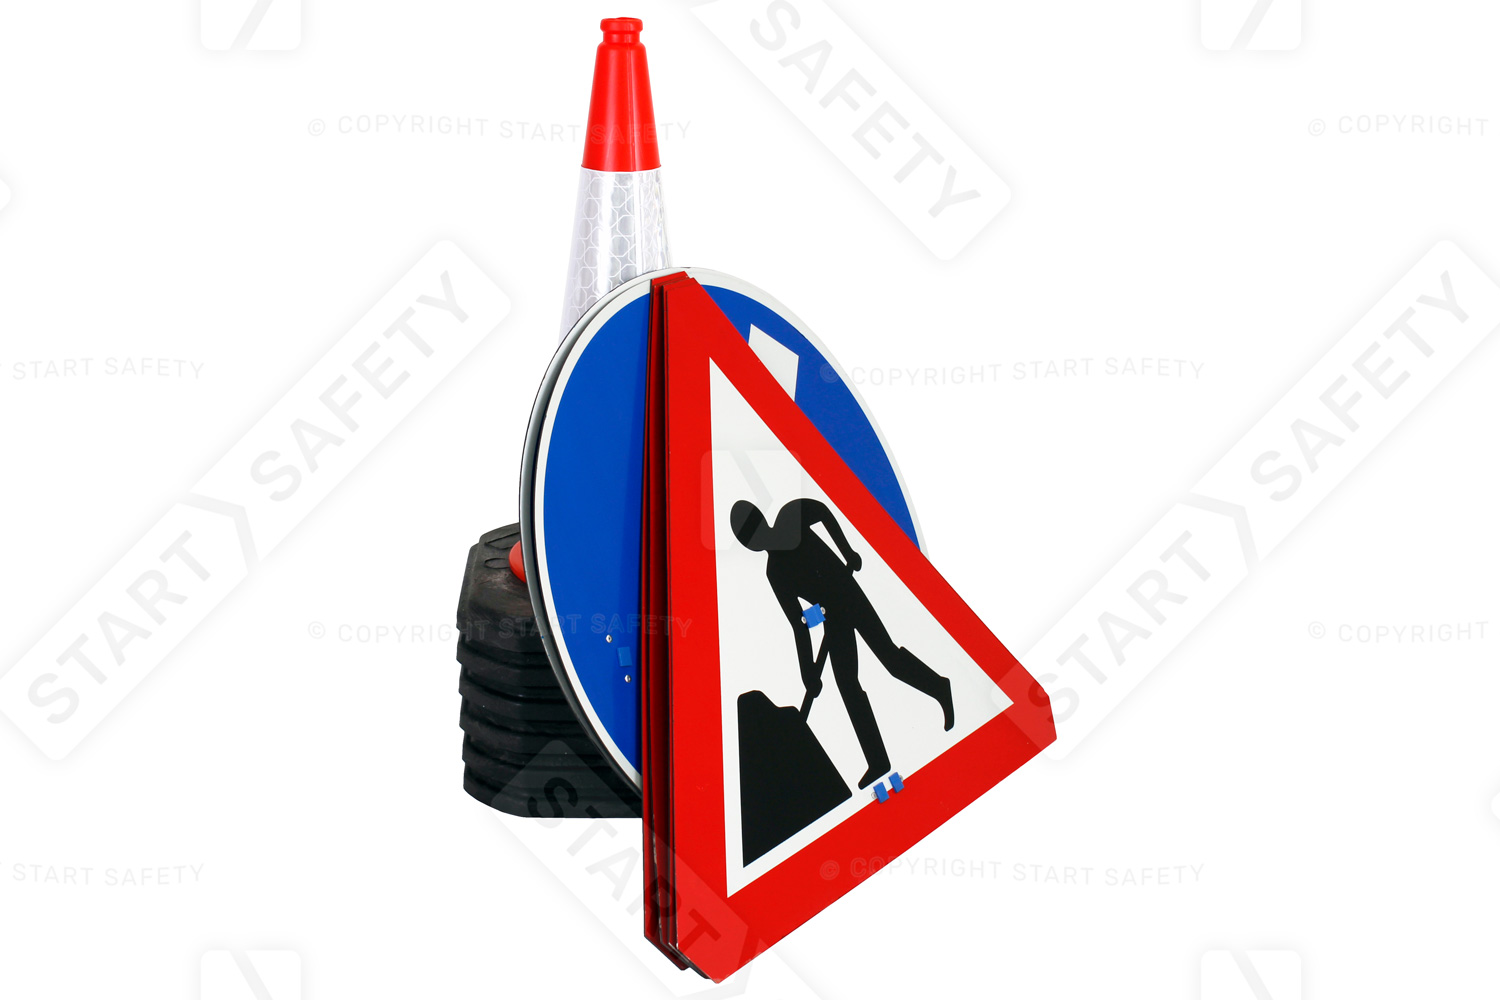 Selection of cone signs leaning against a stack of cones